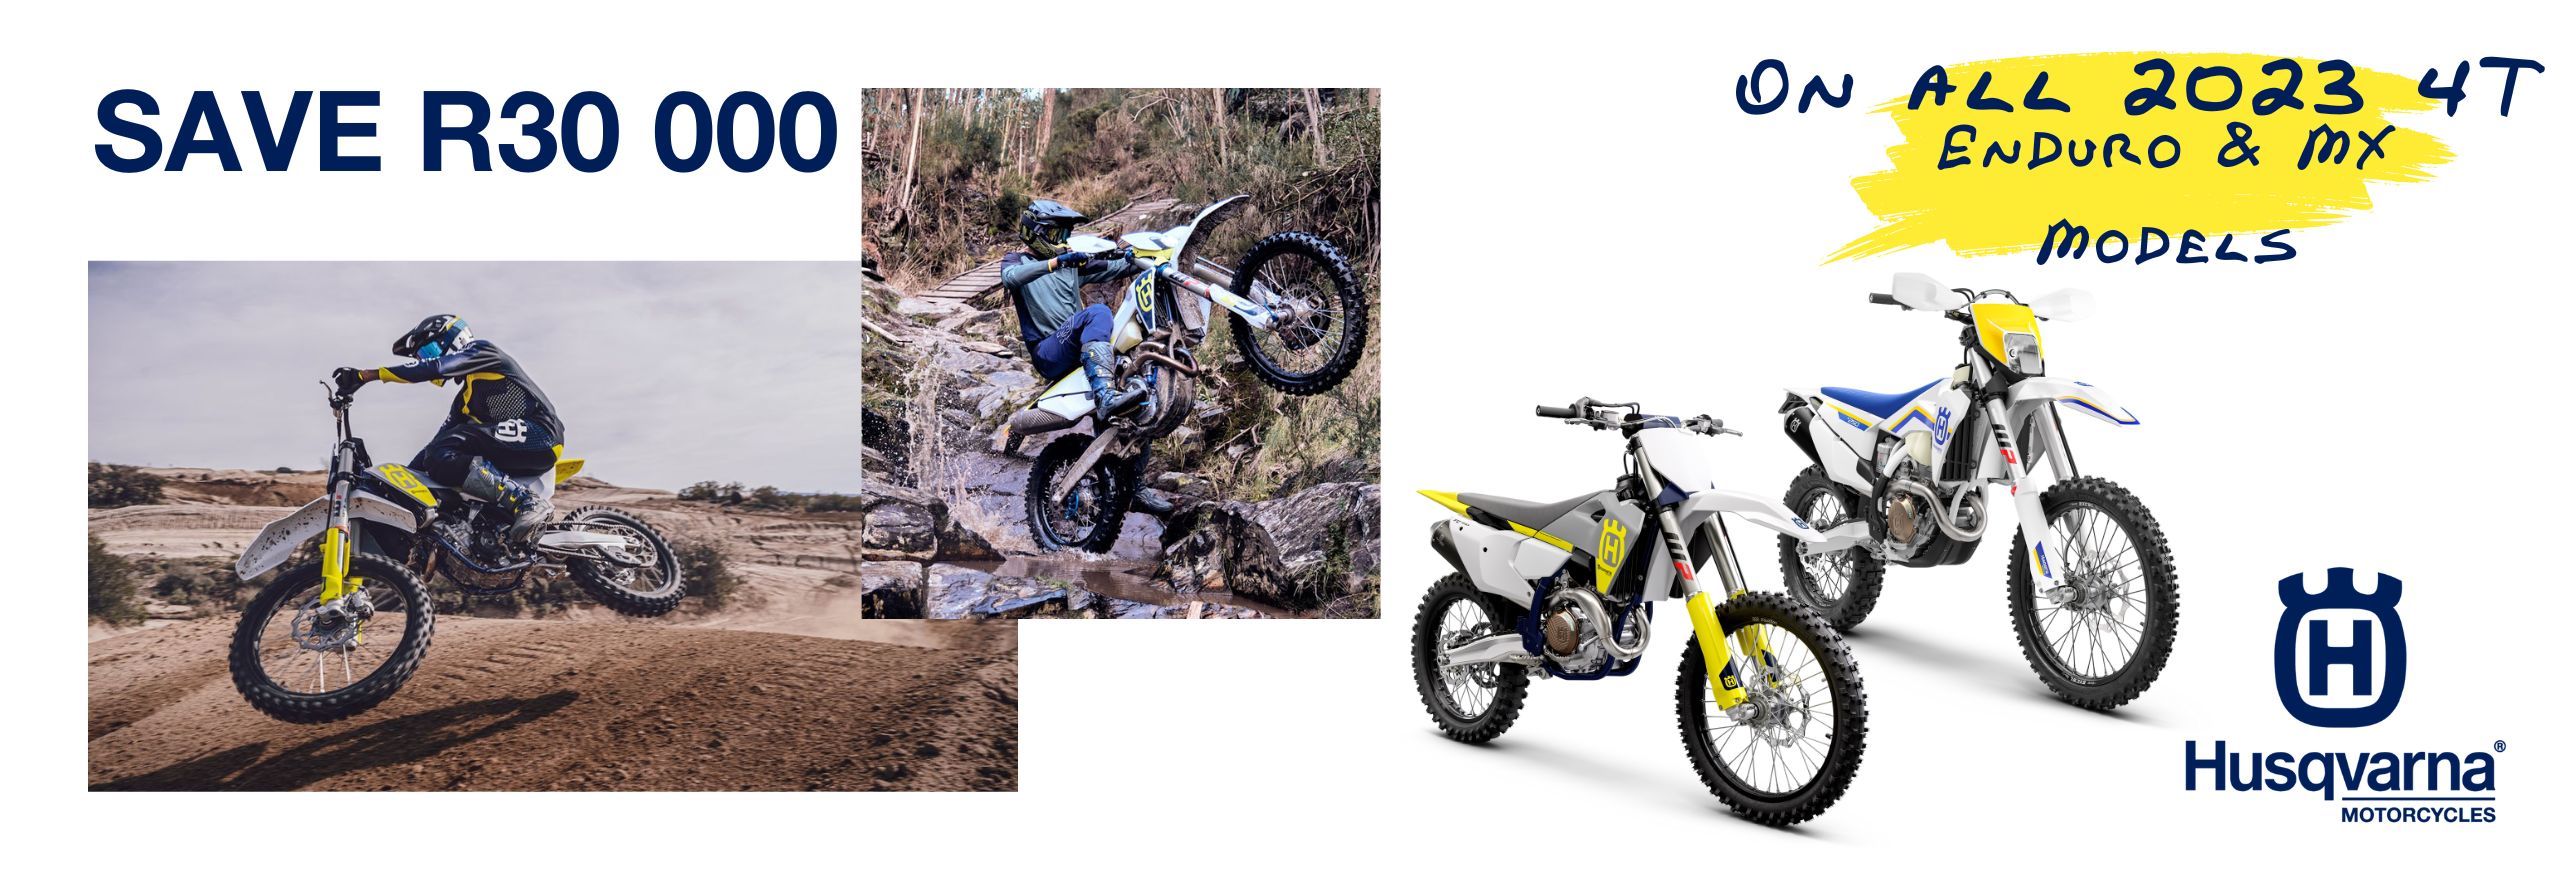 Husqvarna motorcycles South Africa Parts Accessories Technical support